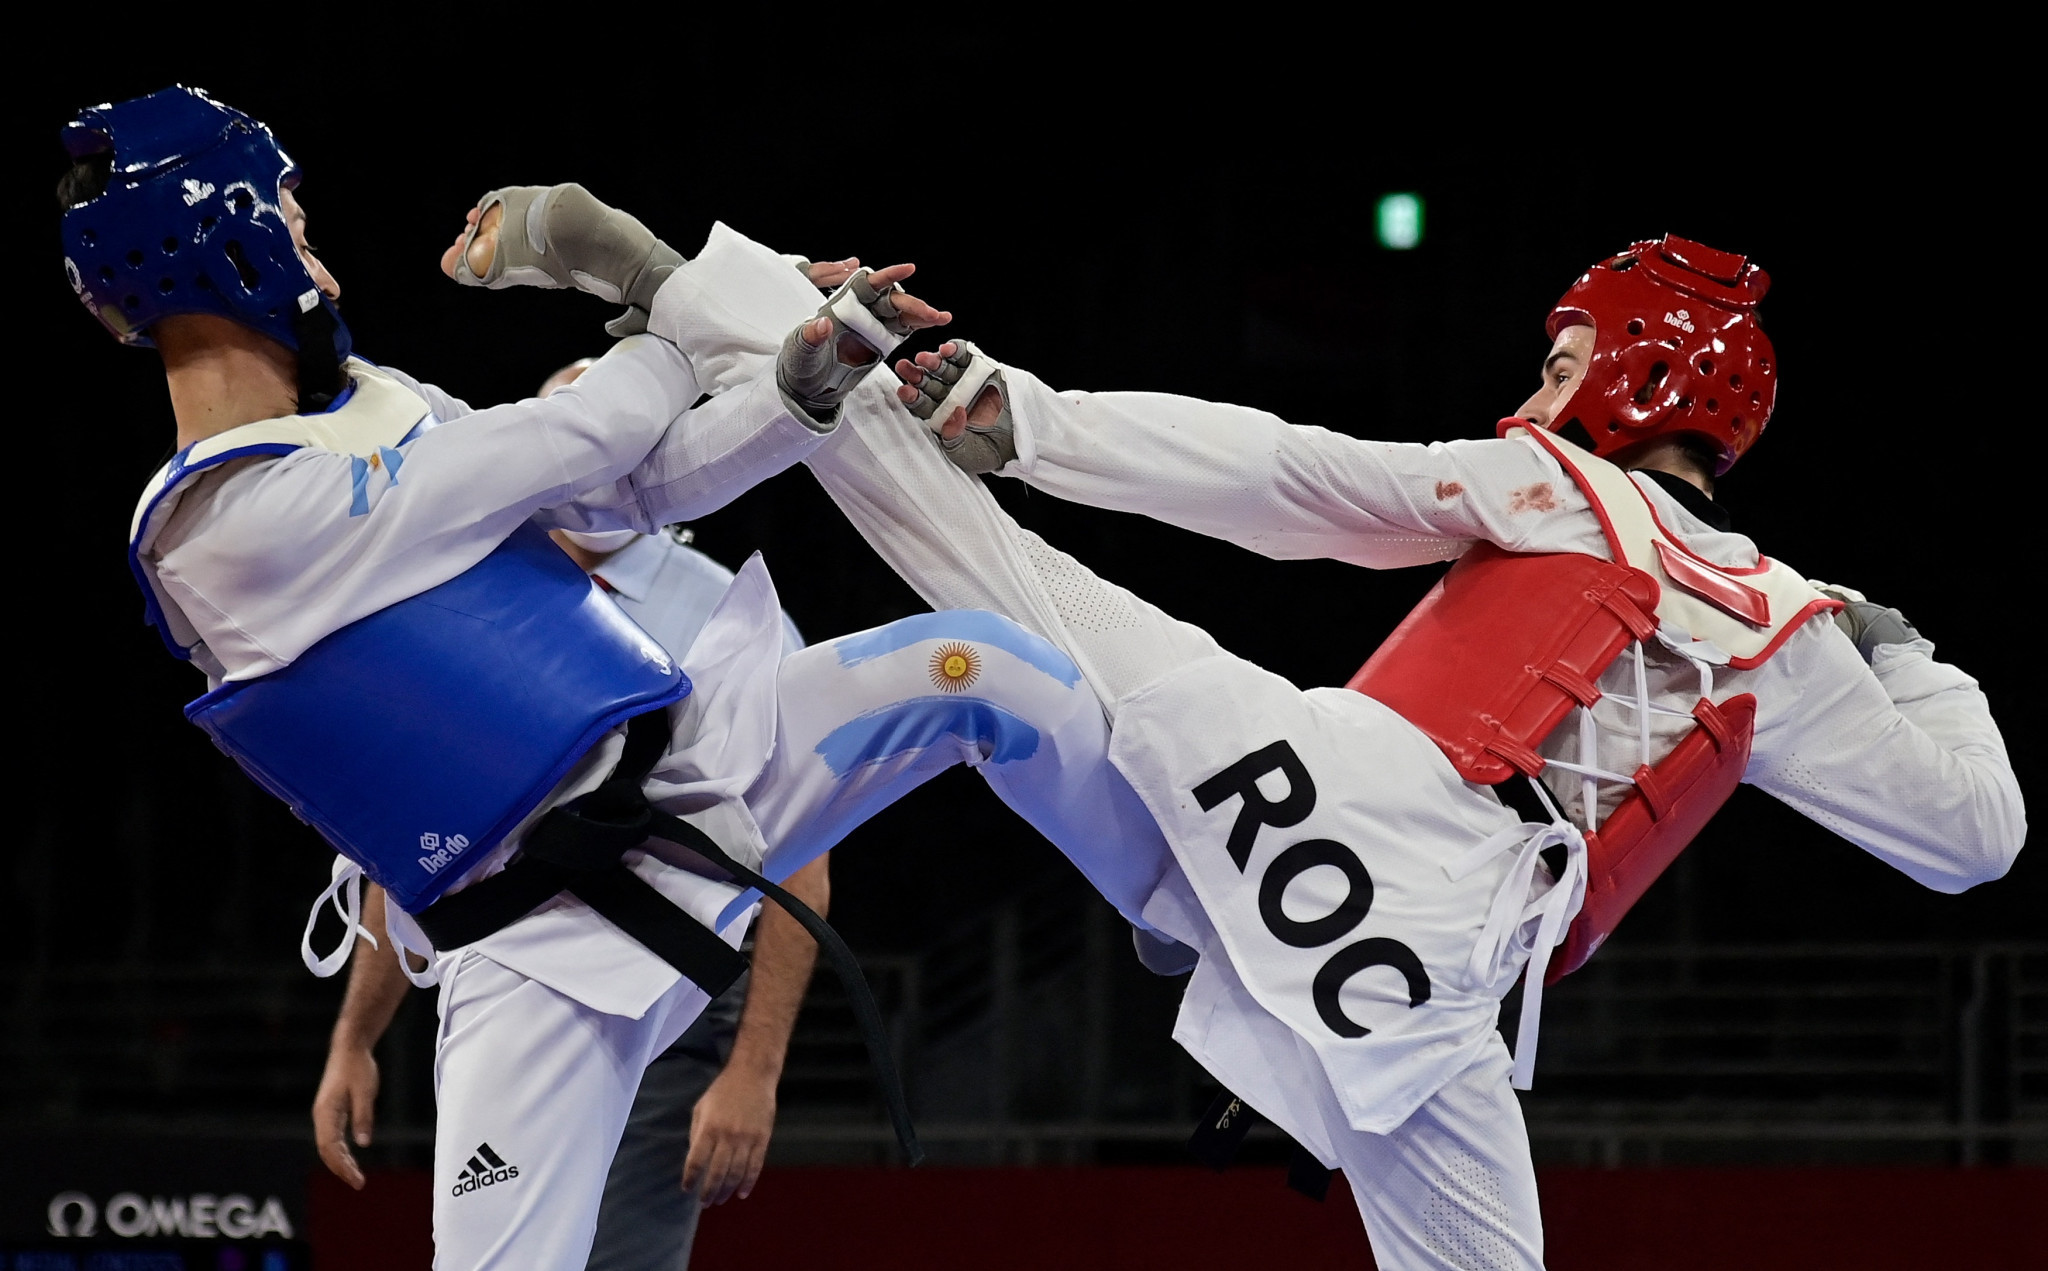 Russian taekwondo practitioners have been banned from international competition since March due to the war in Ukraine ©Getty Images